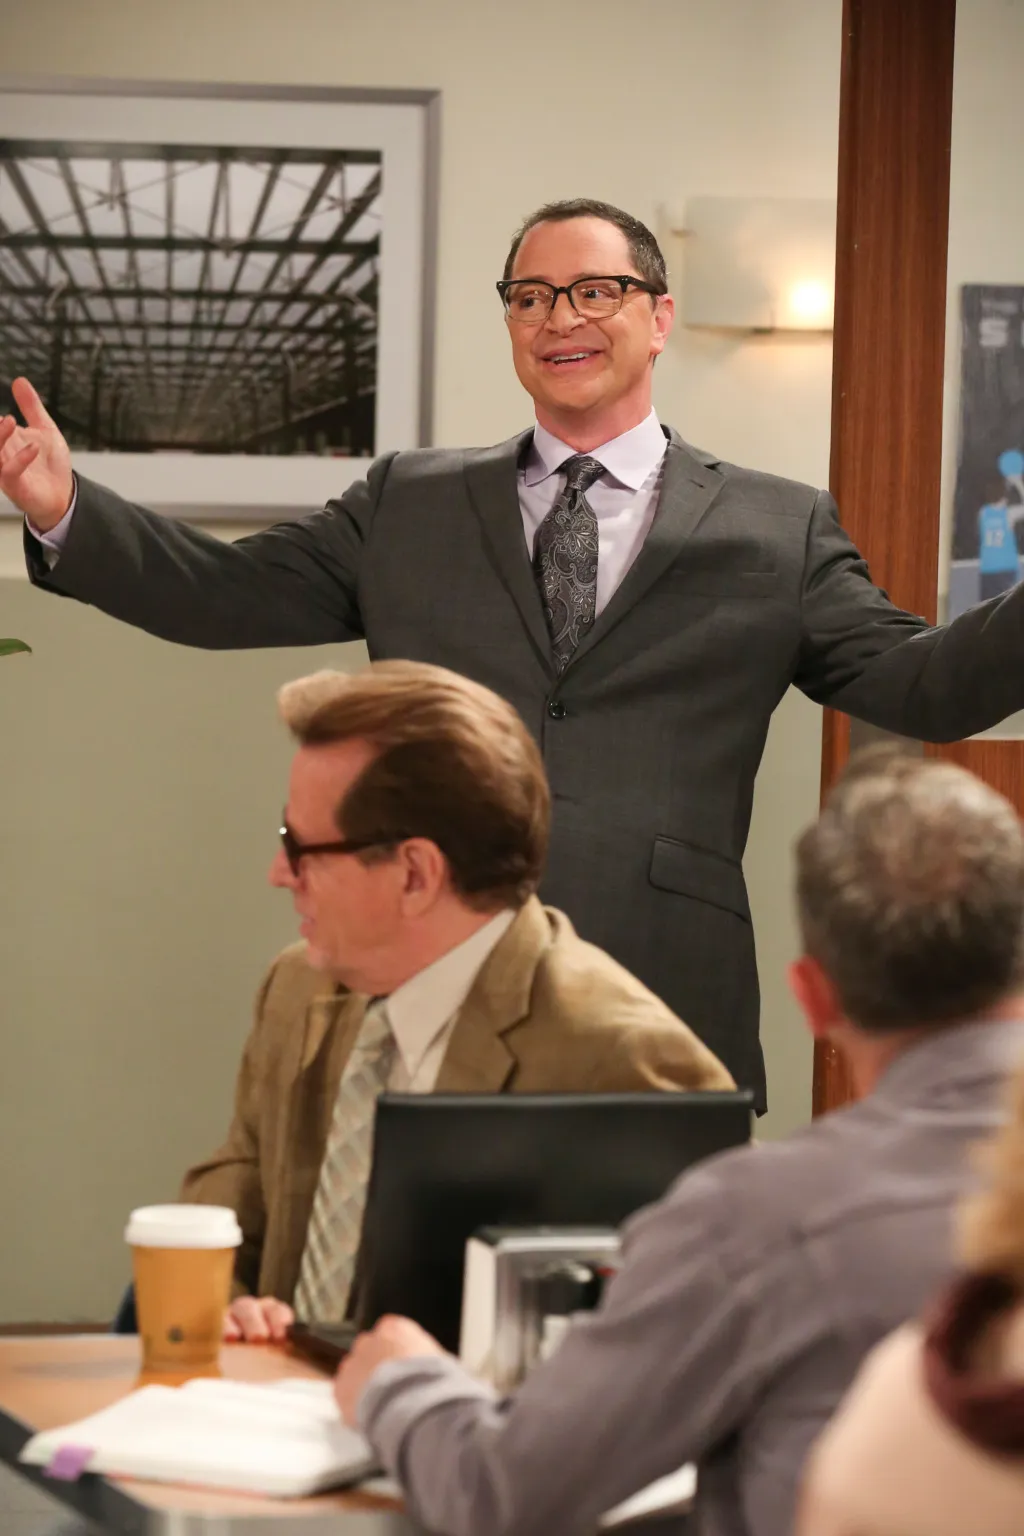 "The Change Constant" - Pictured: President Siebert (Joshua Malina). Sheldon and Amy await big news, on the series finale of THE BIG BANG THEORY, Thursday, May 16 (8:00-8:30PM, ET/PT) on the CBS Television Network. Photo: Michael Yarish/Warner Bros. Enter